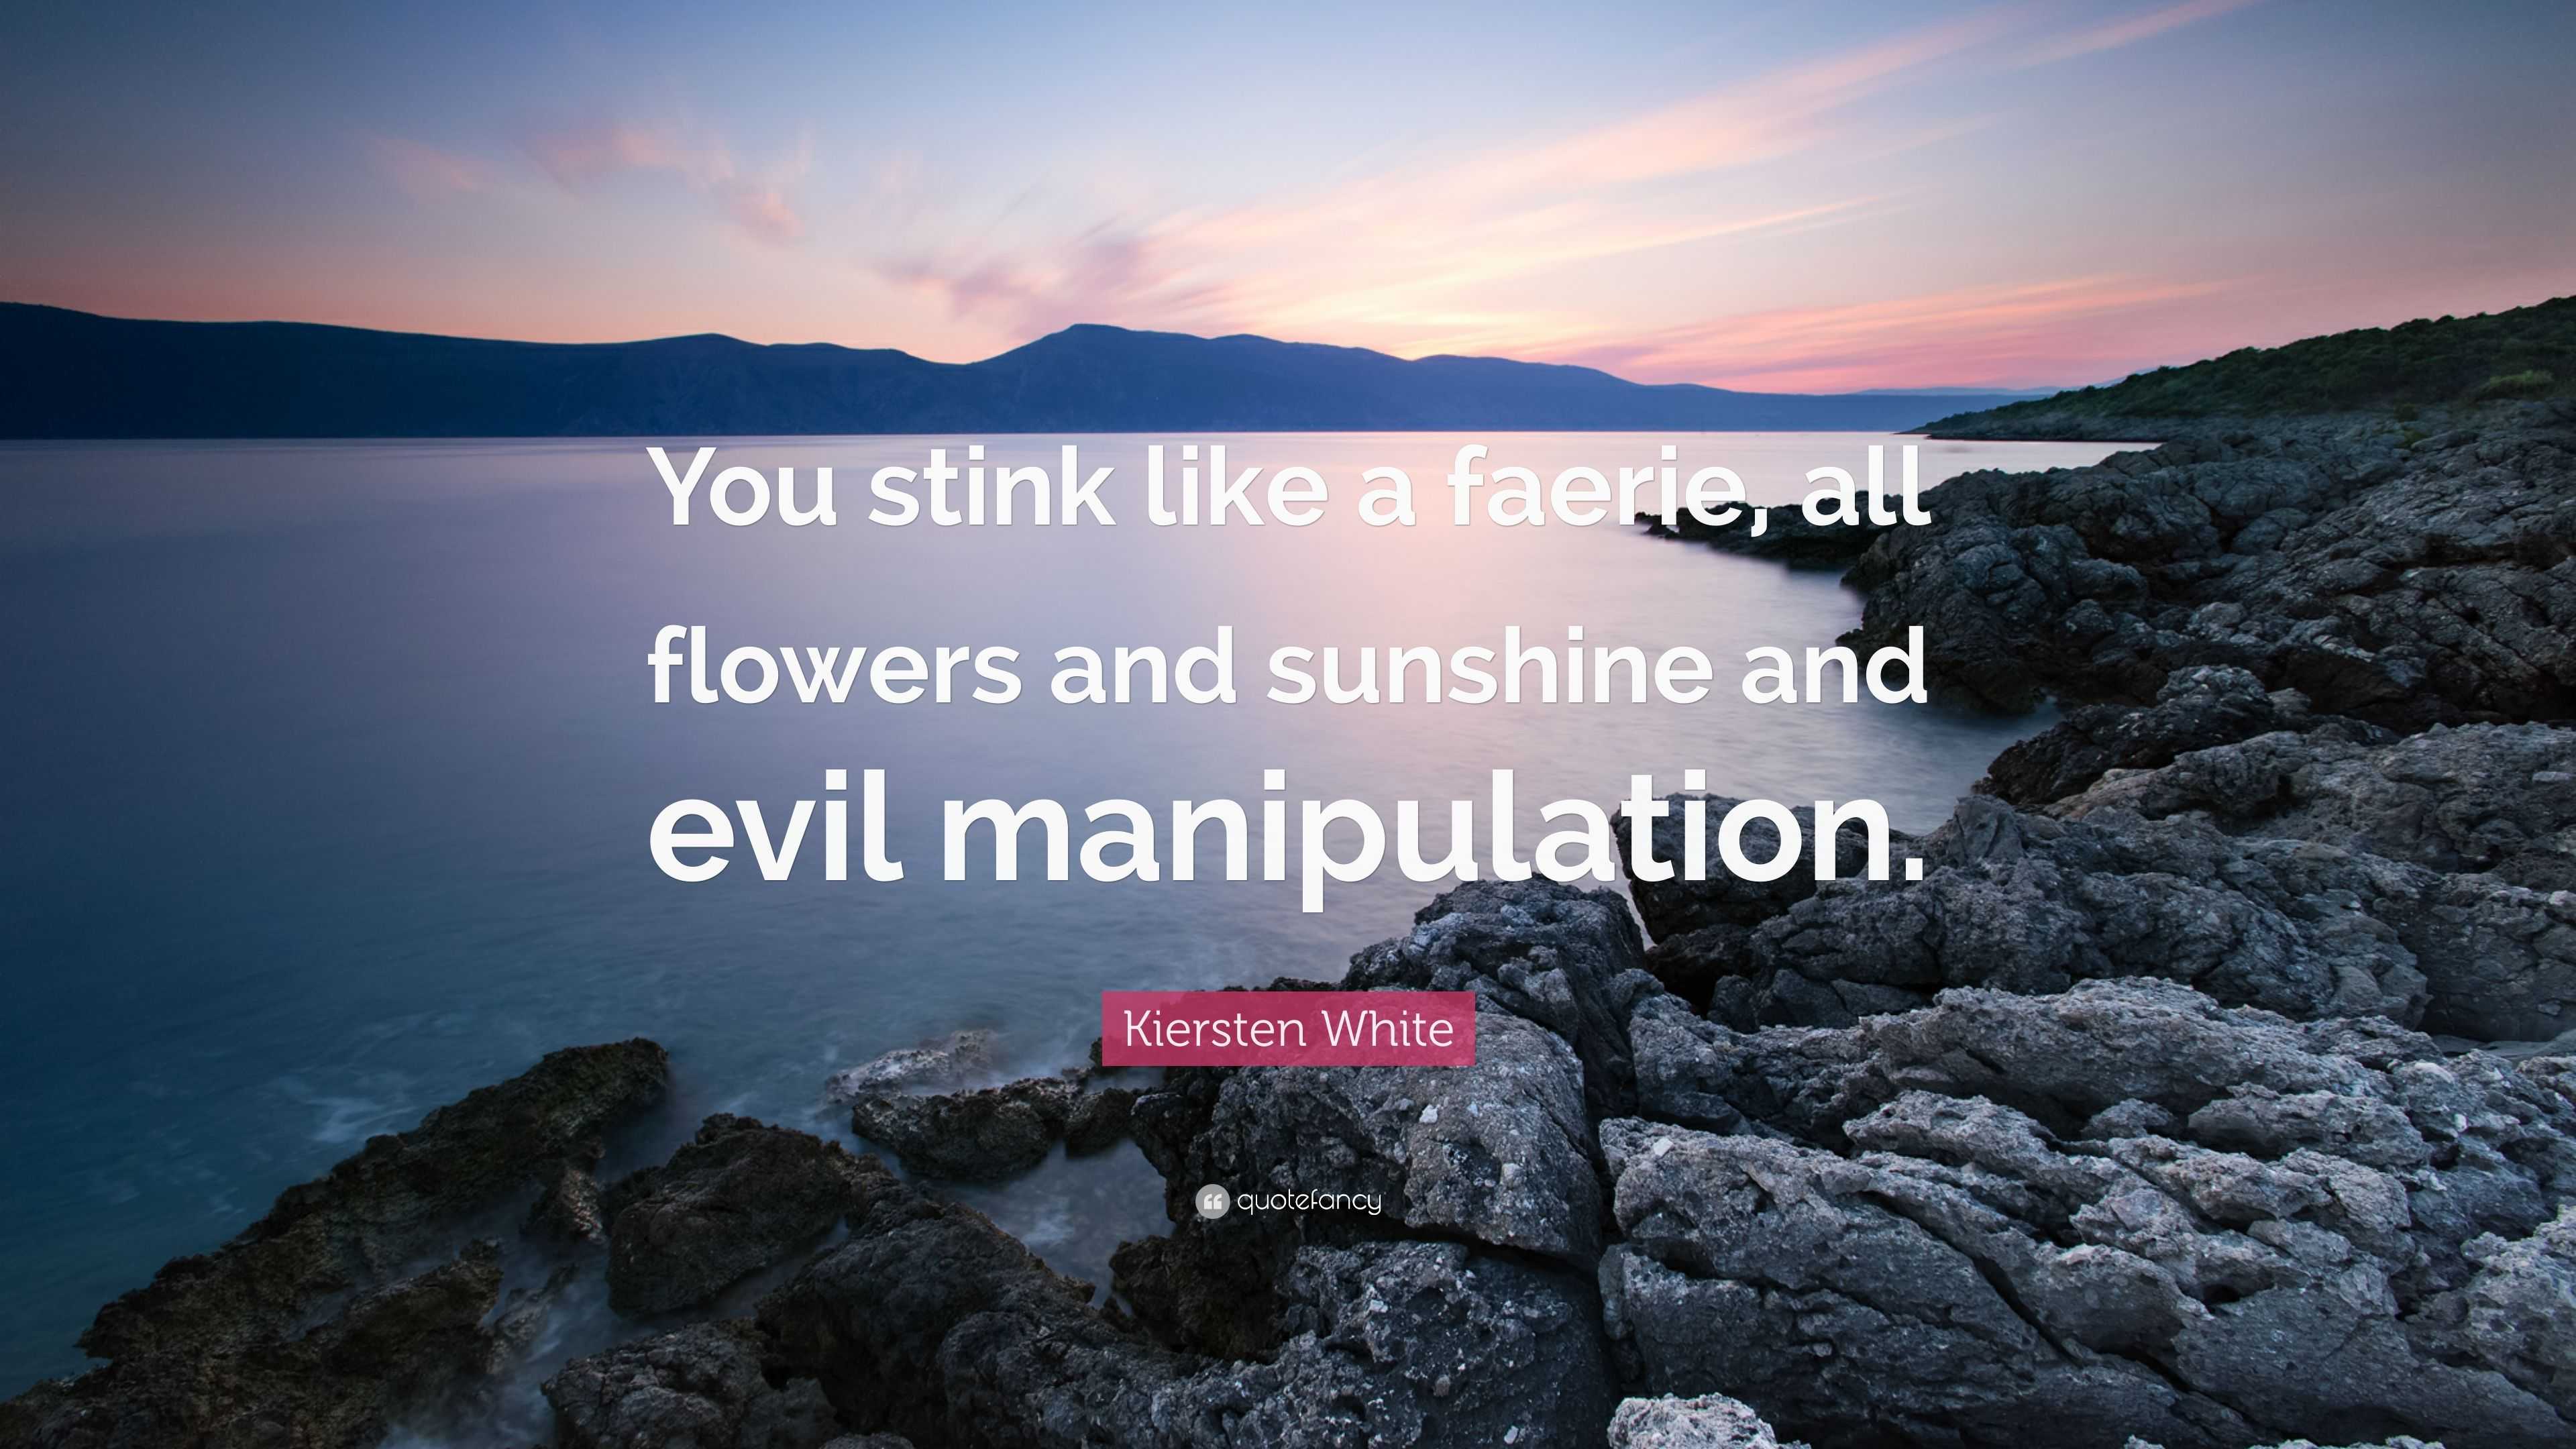 Kiersten White Quote: “You stink like a faerie, all flowers and ...